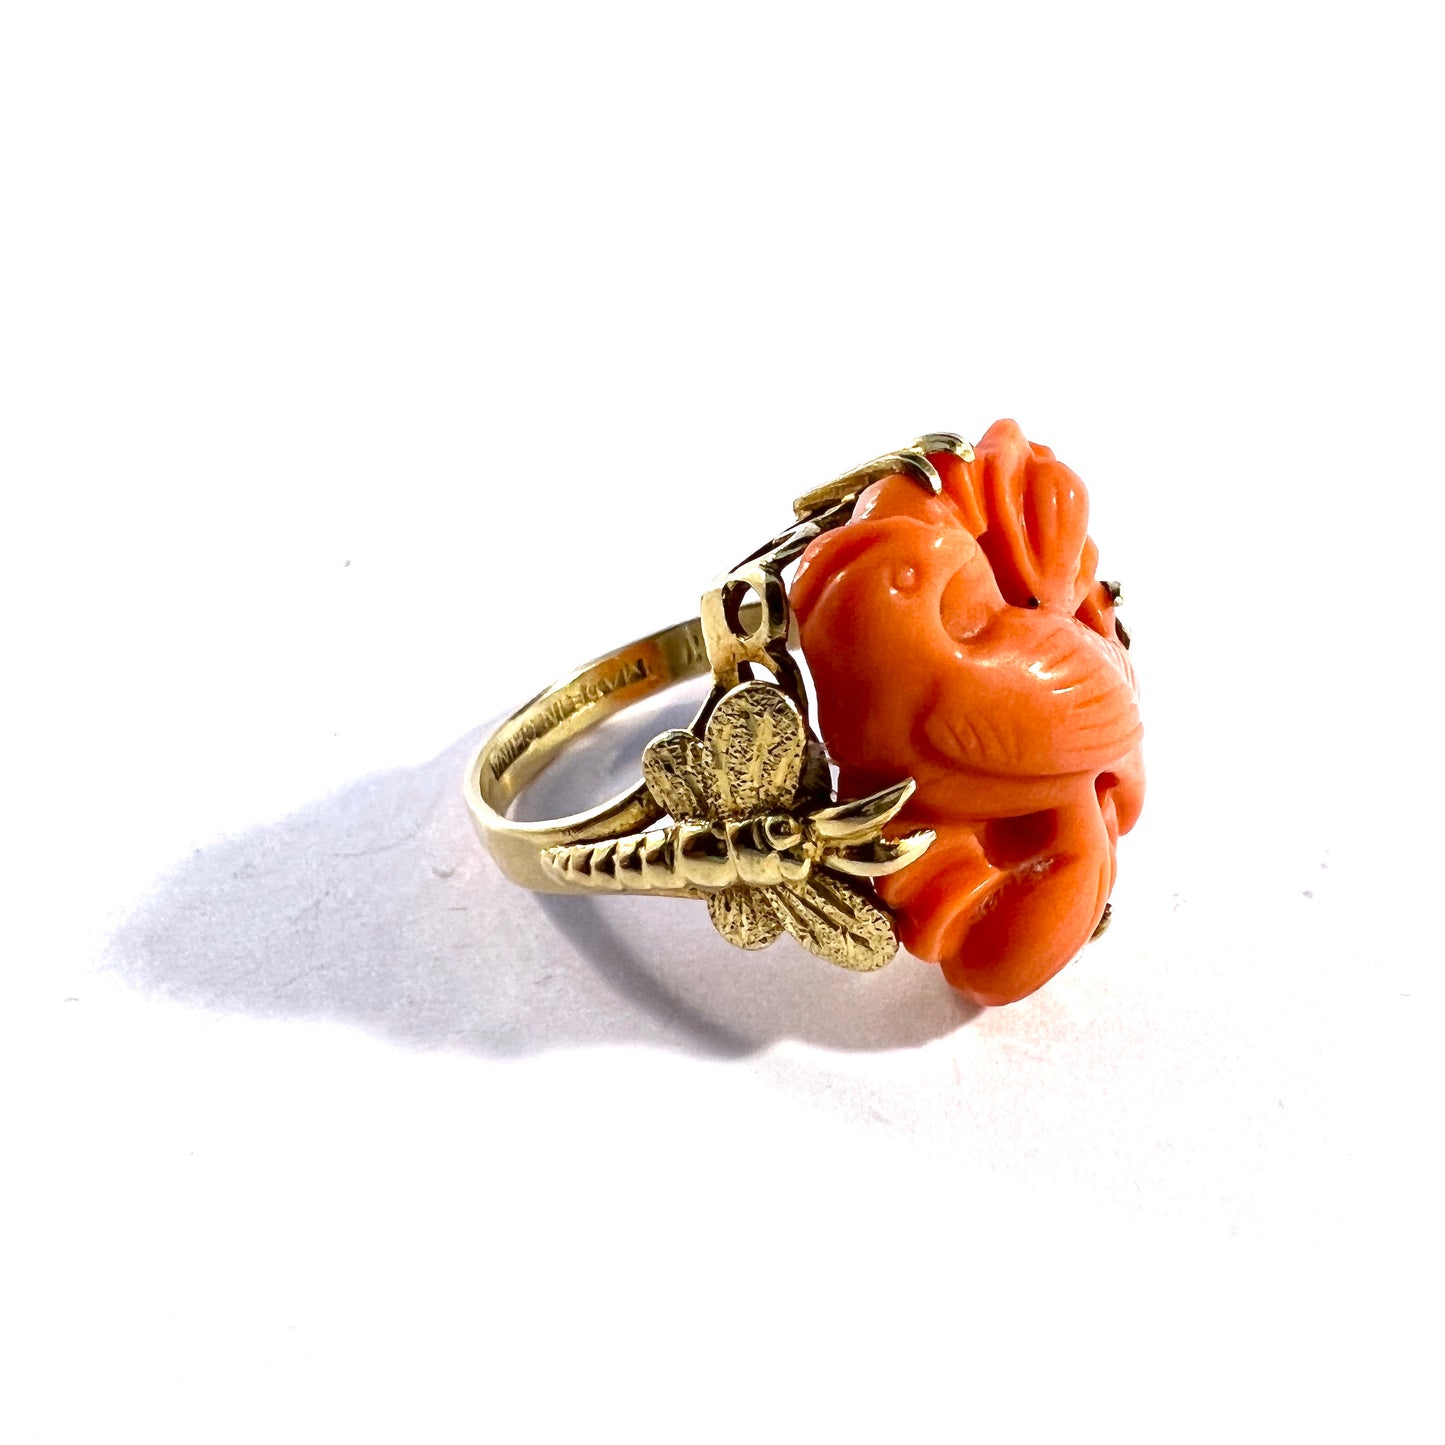 China, Vintage 14k Gold Carved Coral Bird Dragonfly Ring.